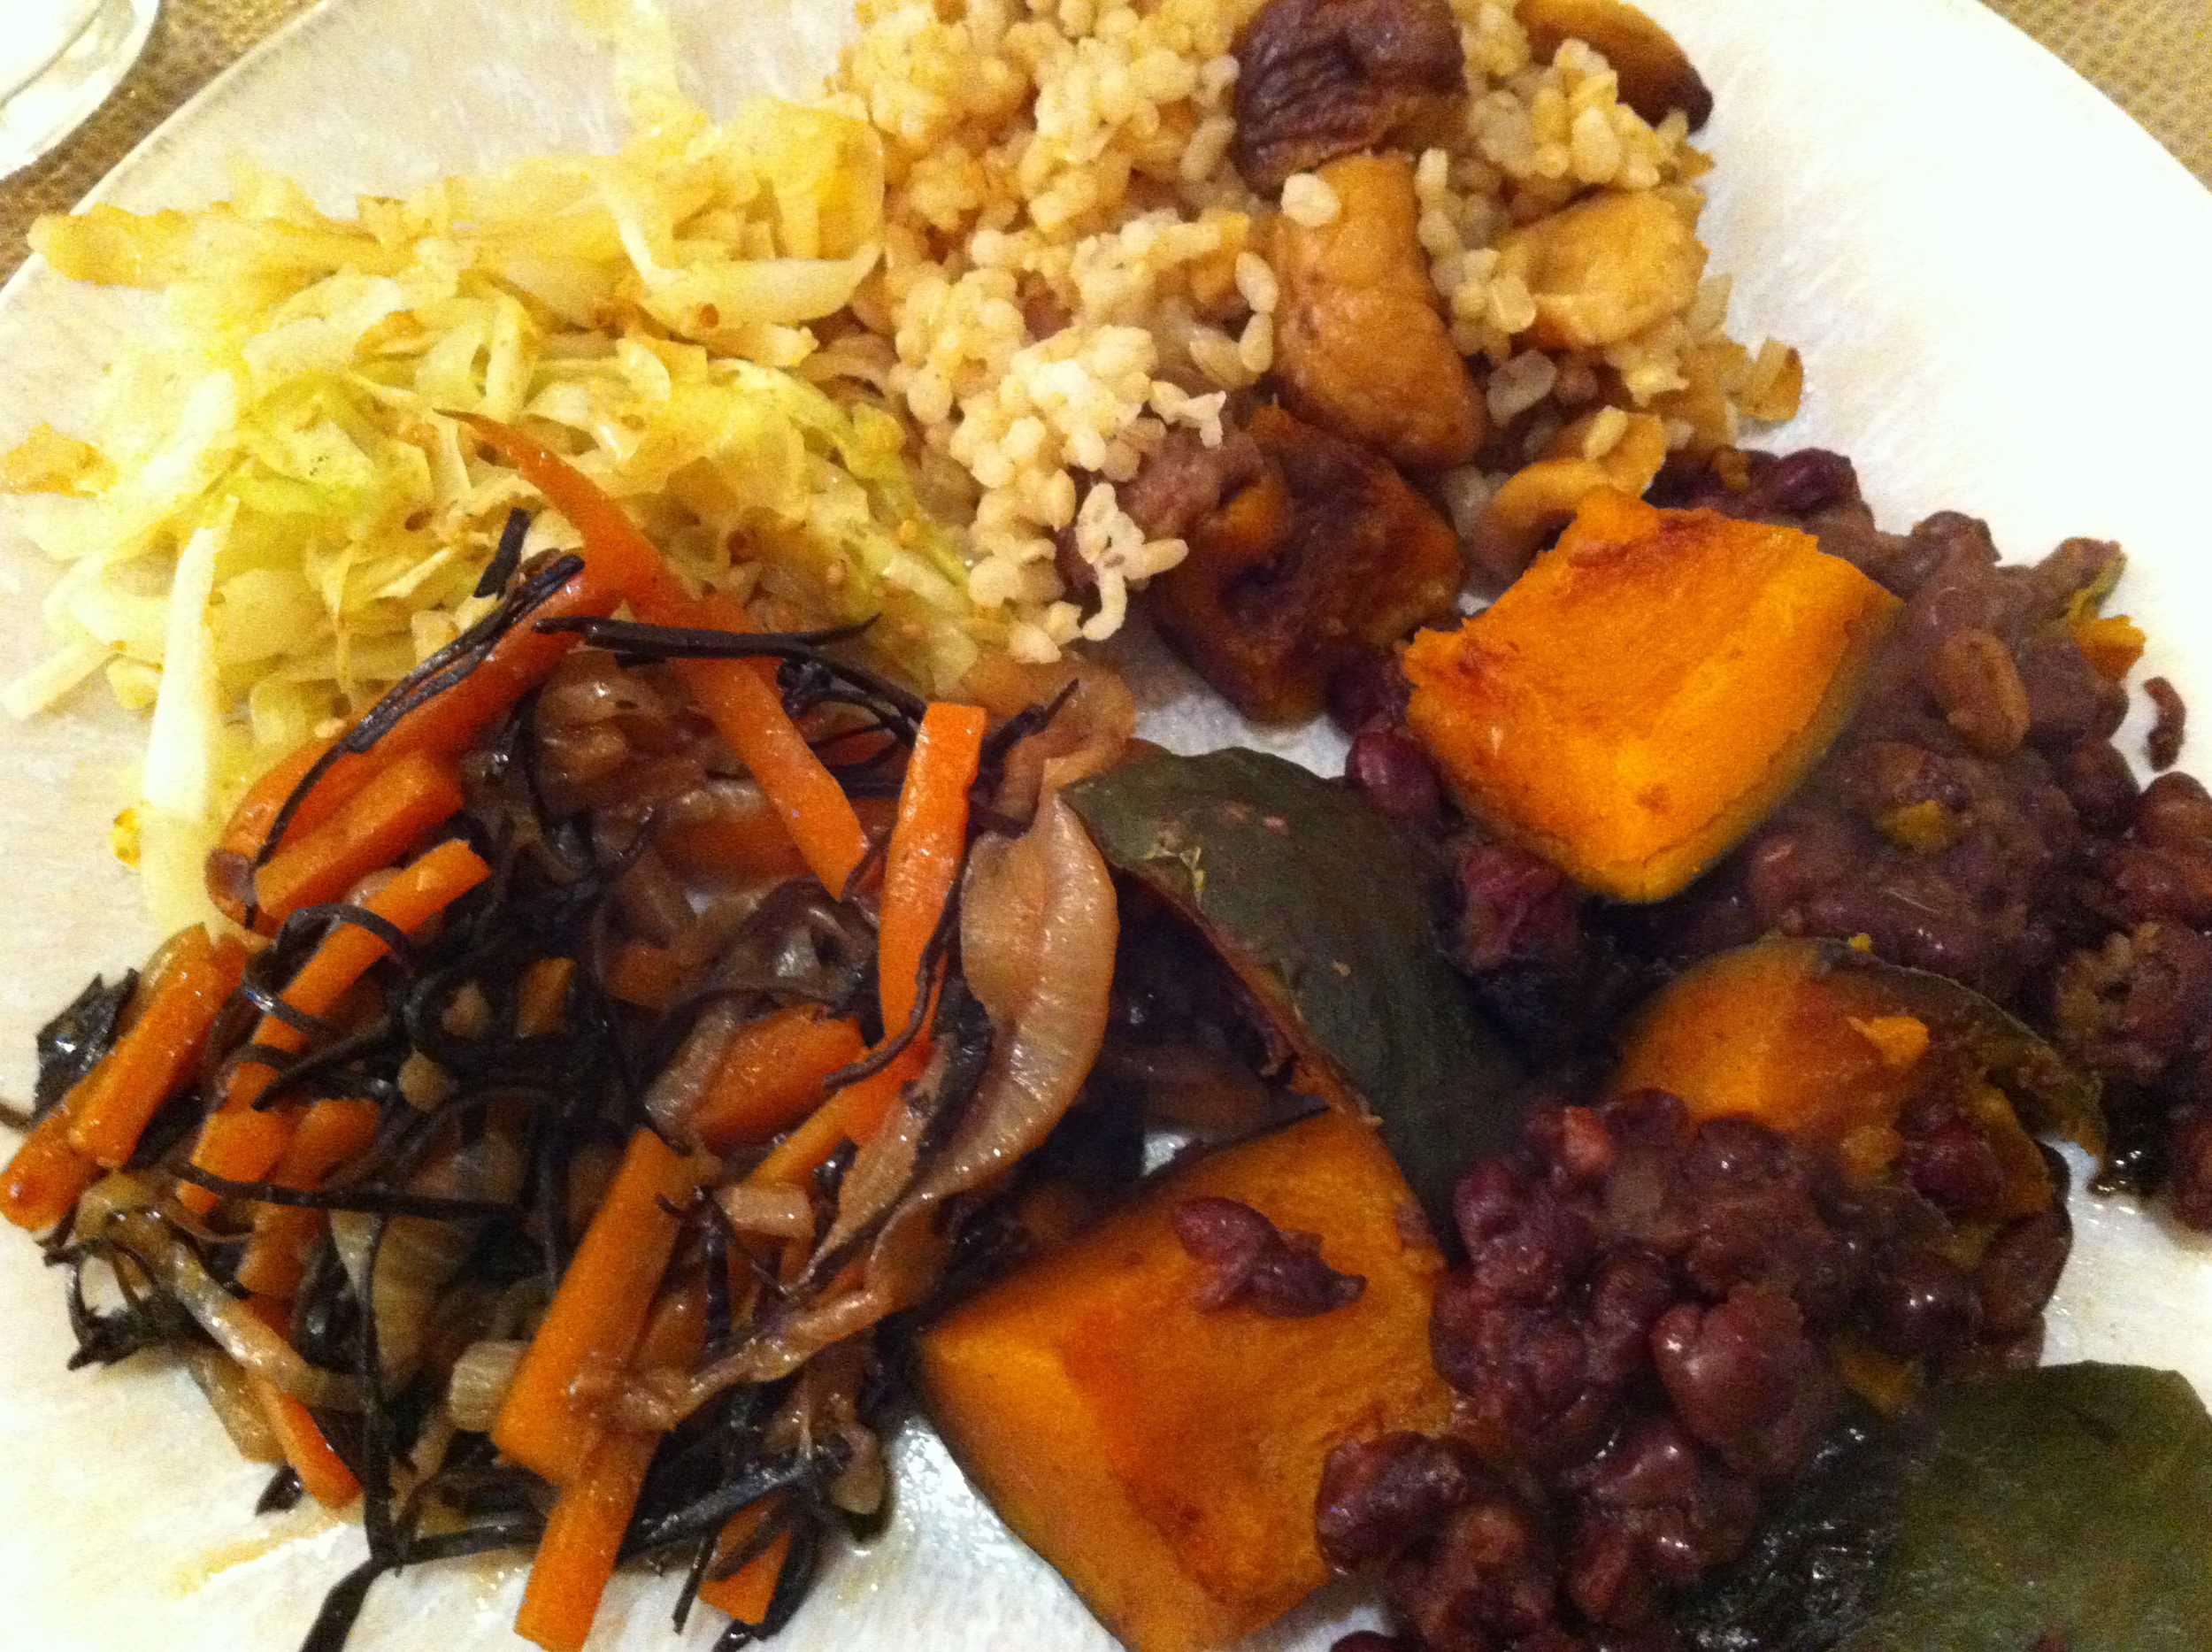 This combo of vegan macro foods makes a delicious dinner.